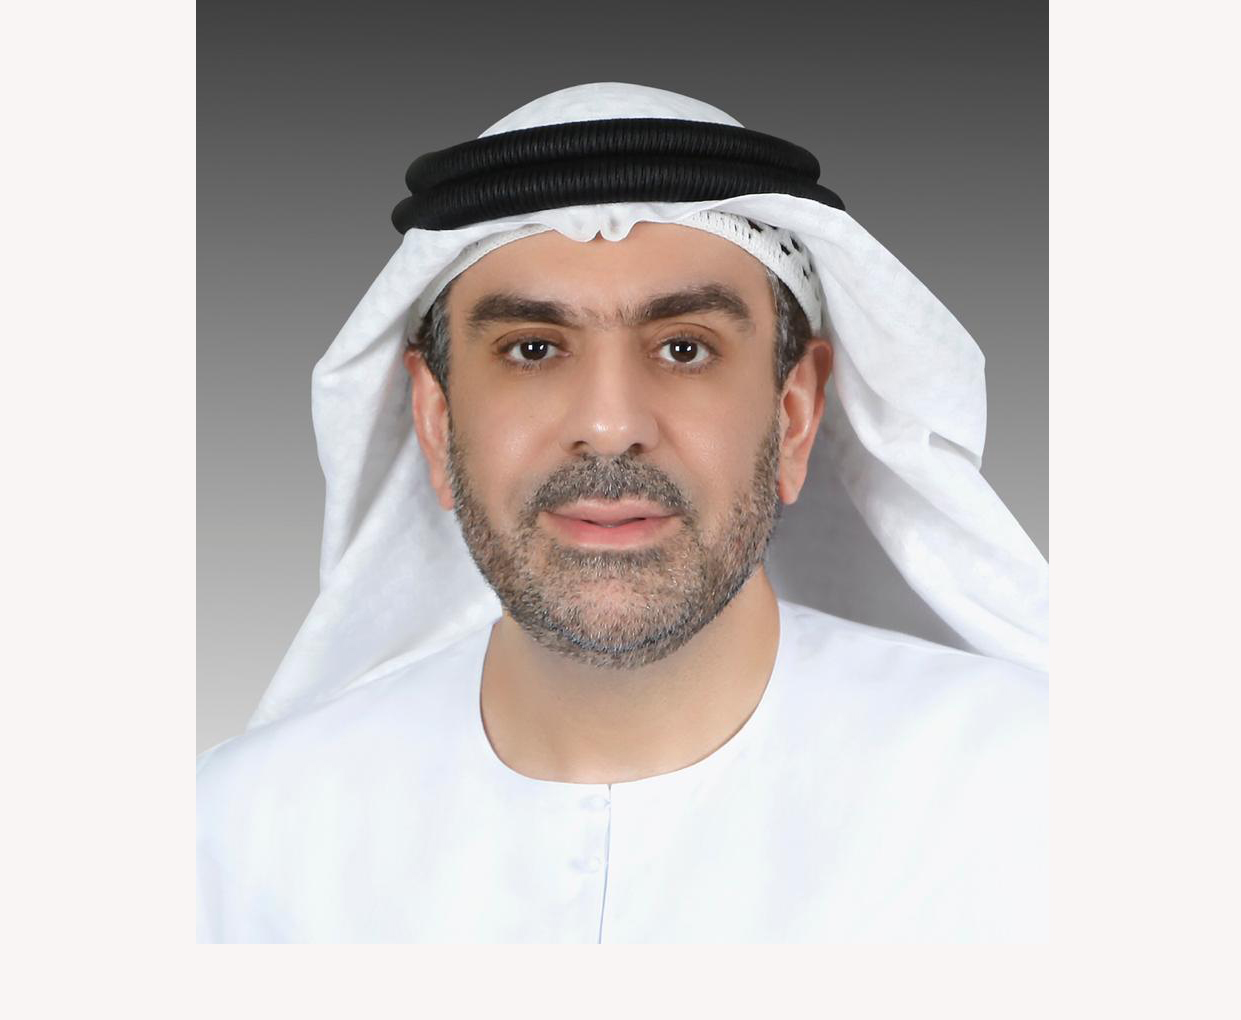 Emirati doctors have always demonstrated highest levels of commitment and readiness to sacrifice: Al Olama